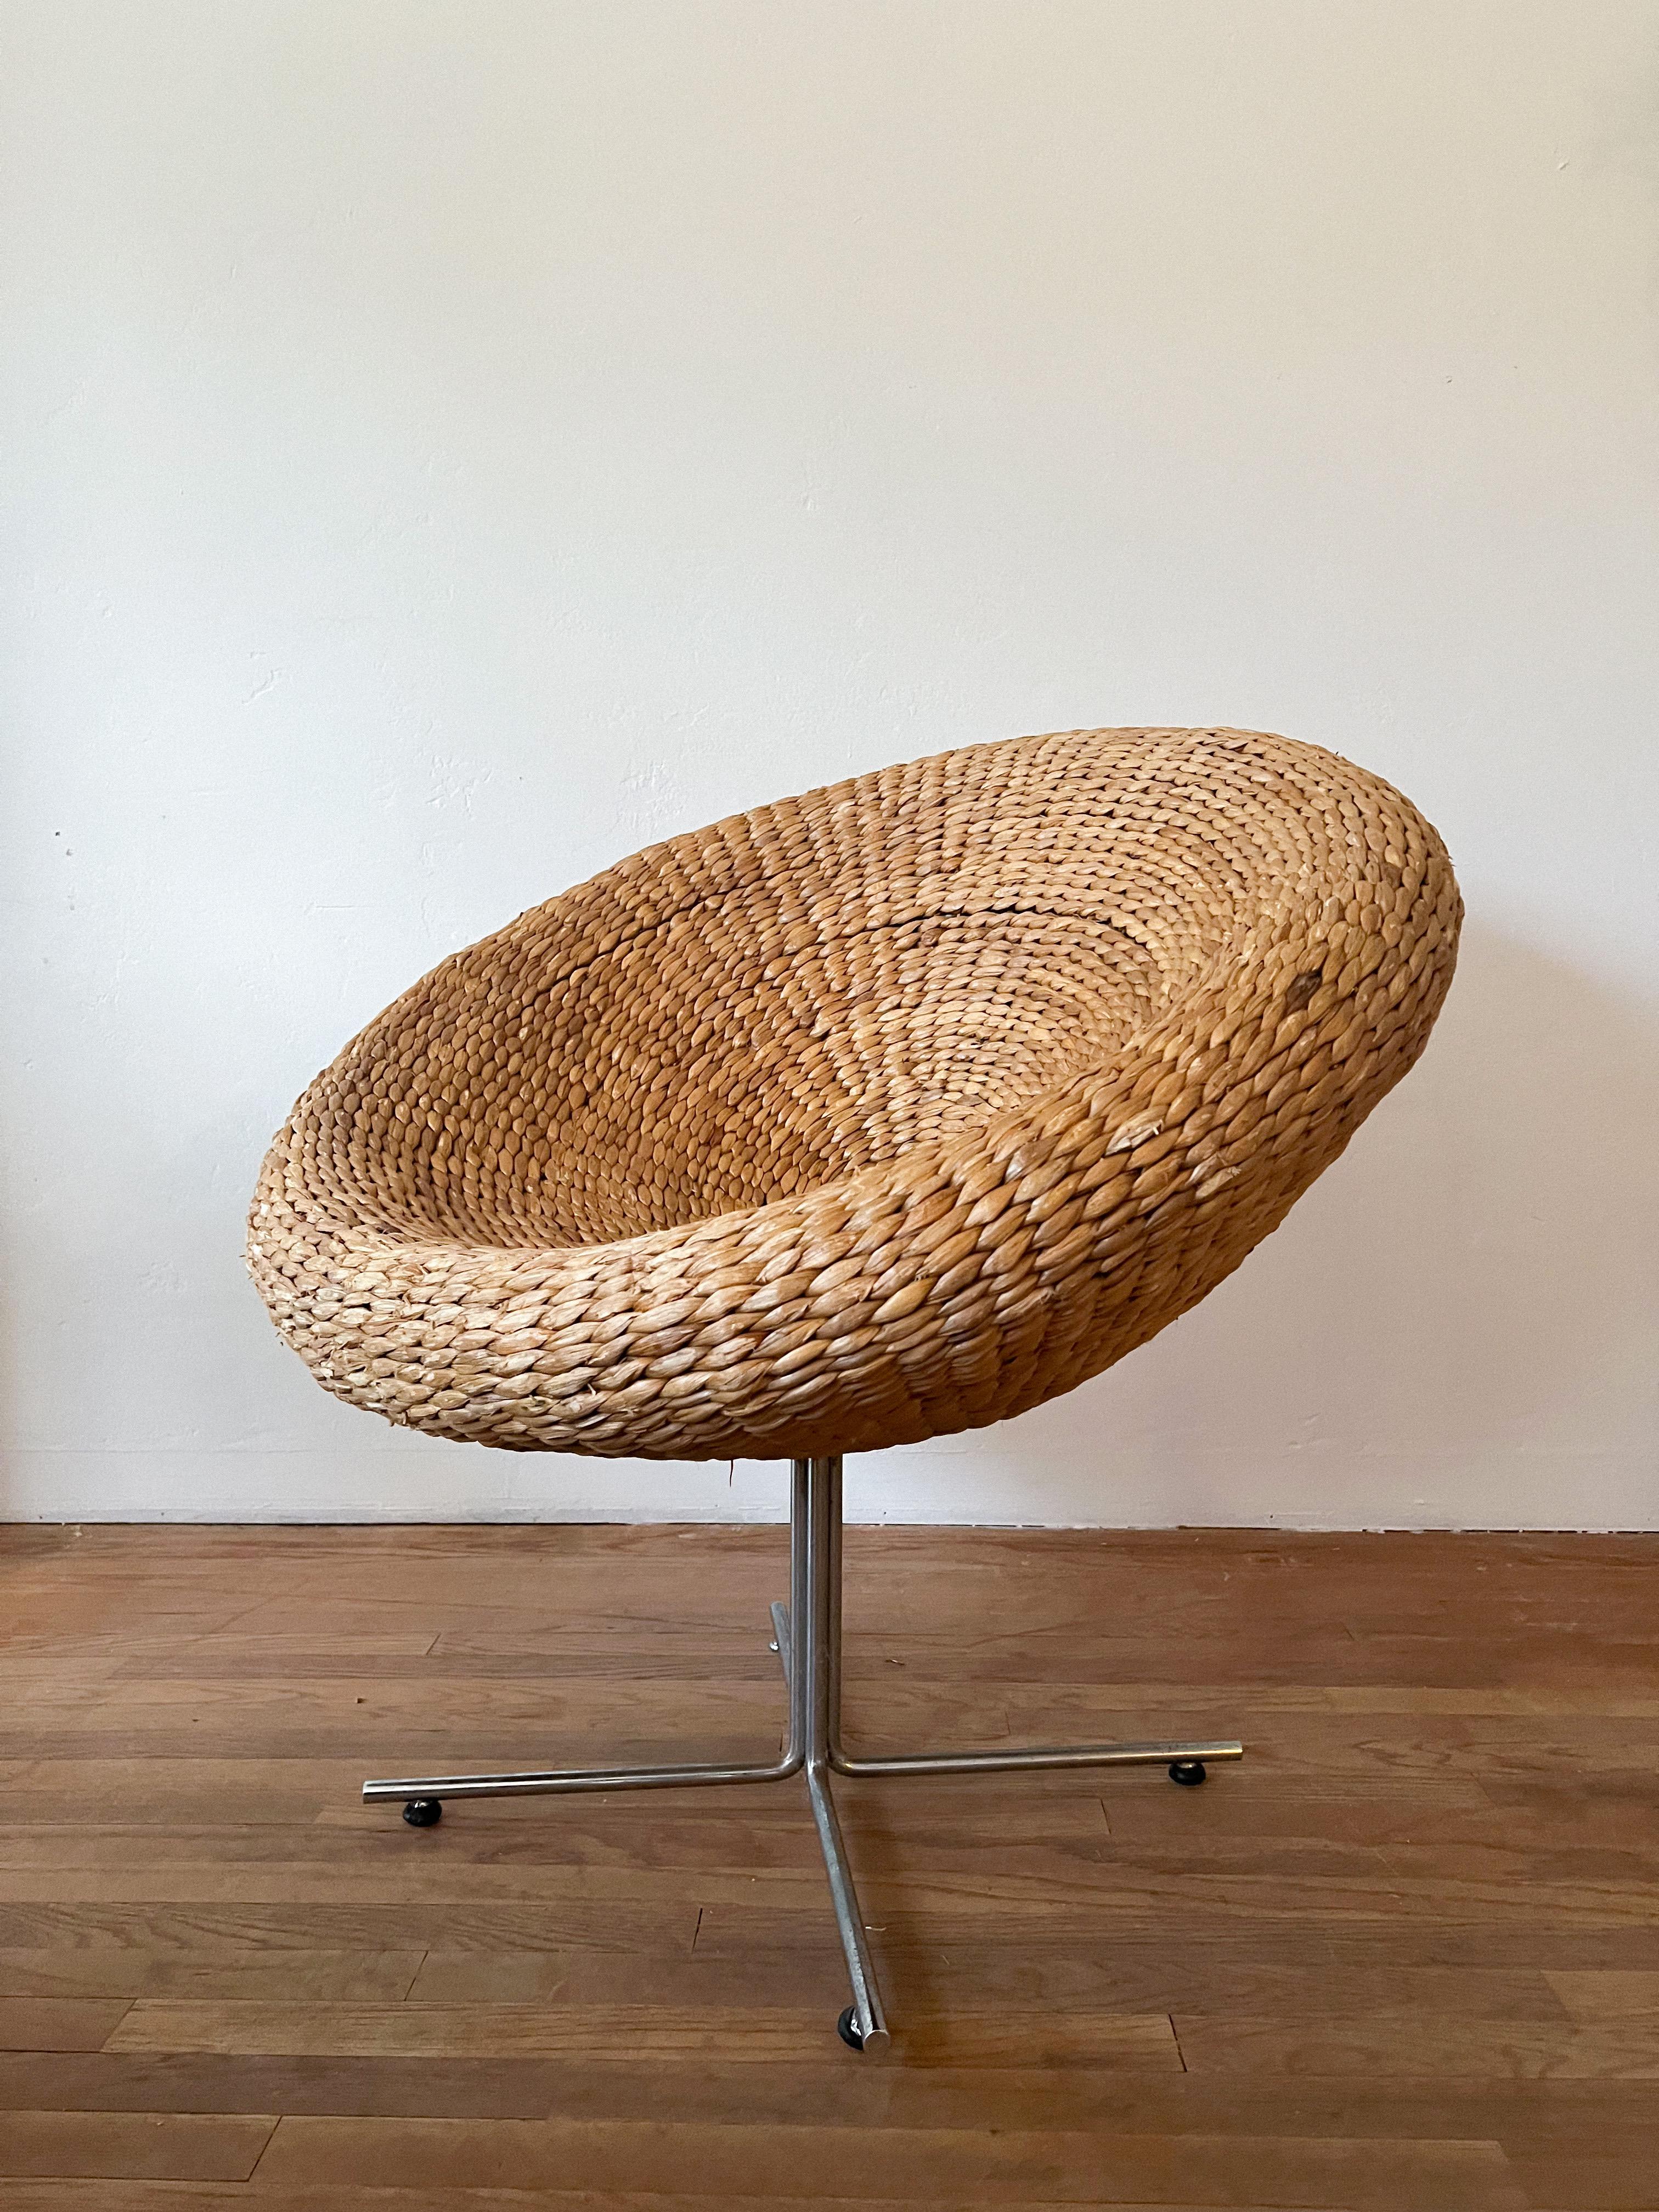 Space age pod/egg shaped lounge chair made of handwoven wicker with a very minimalistic chrome base. This is a great statement piece.